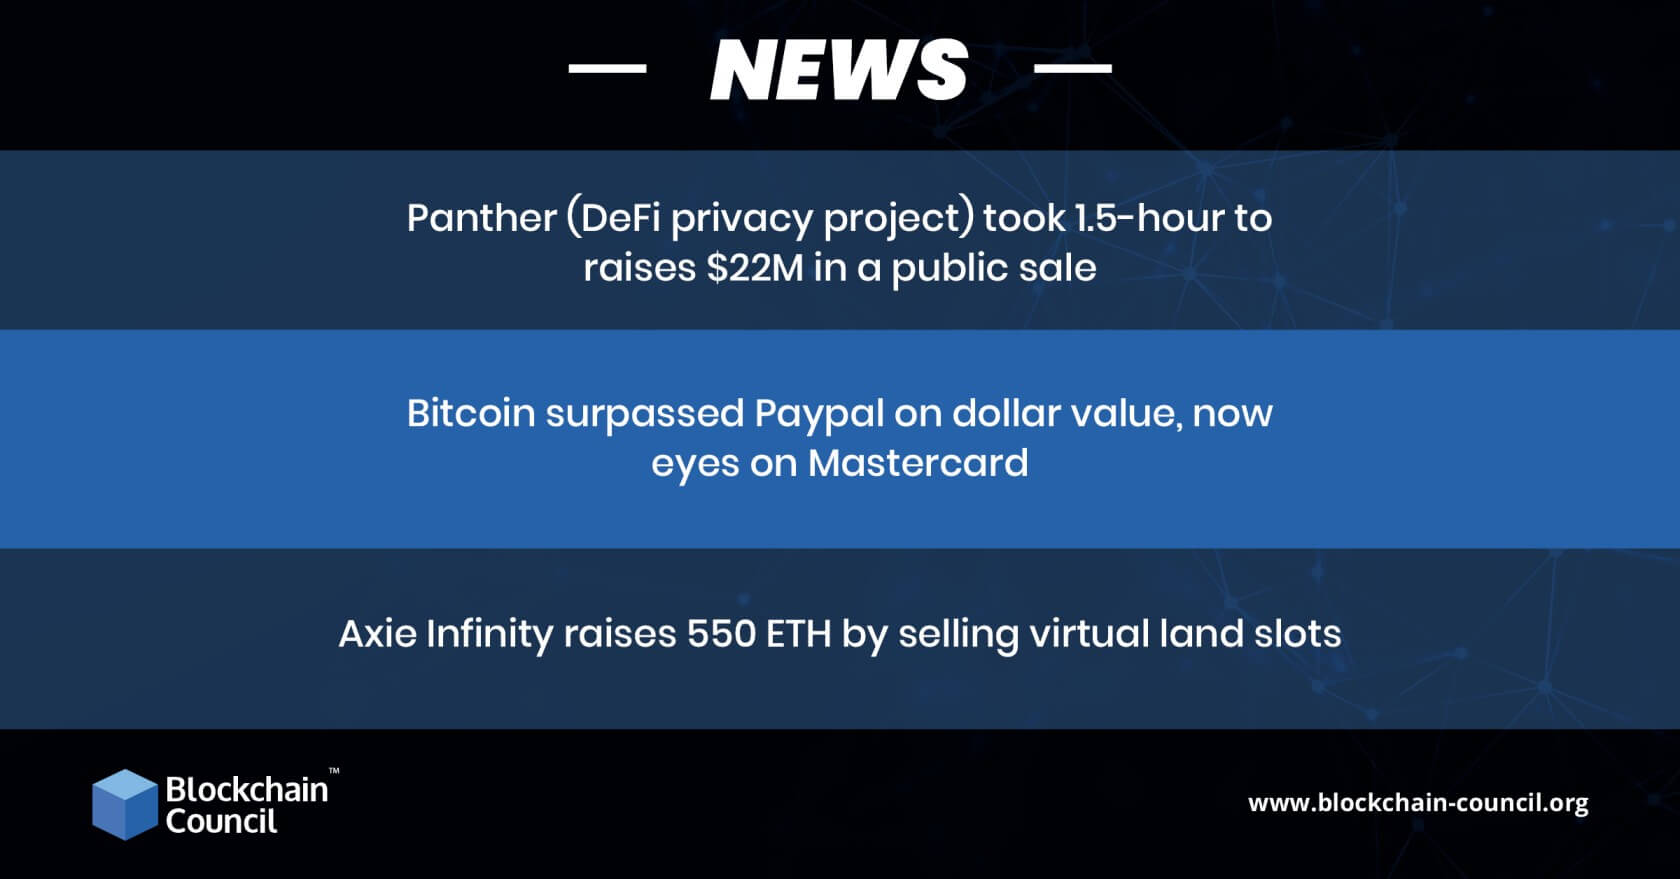 Panther (DeFi privacy project) took 1.5-hour to raises $22M in a public sale (1) (1)